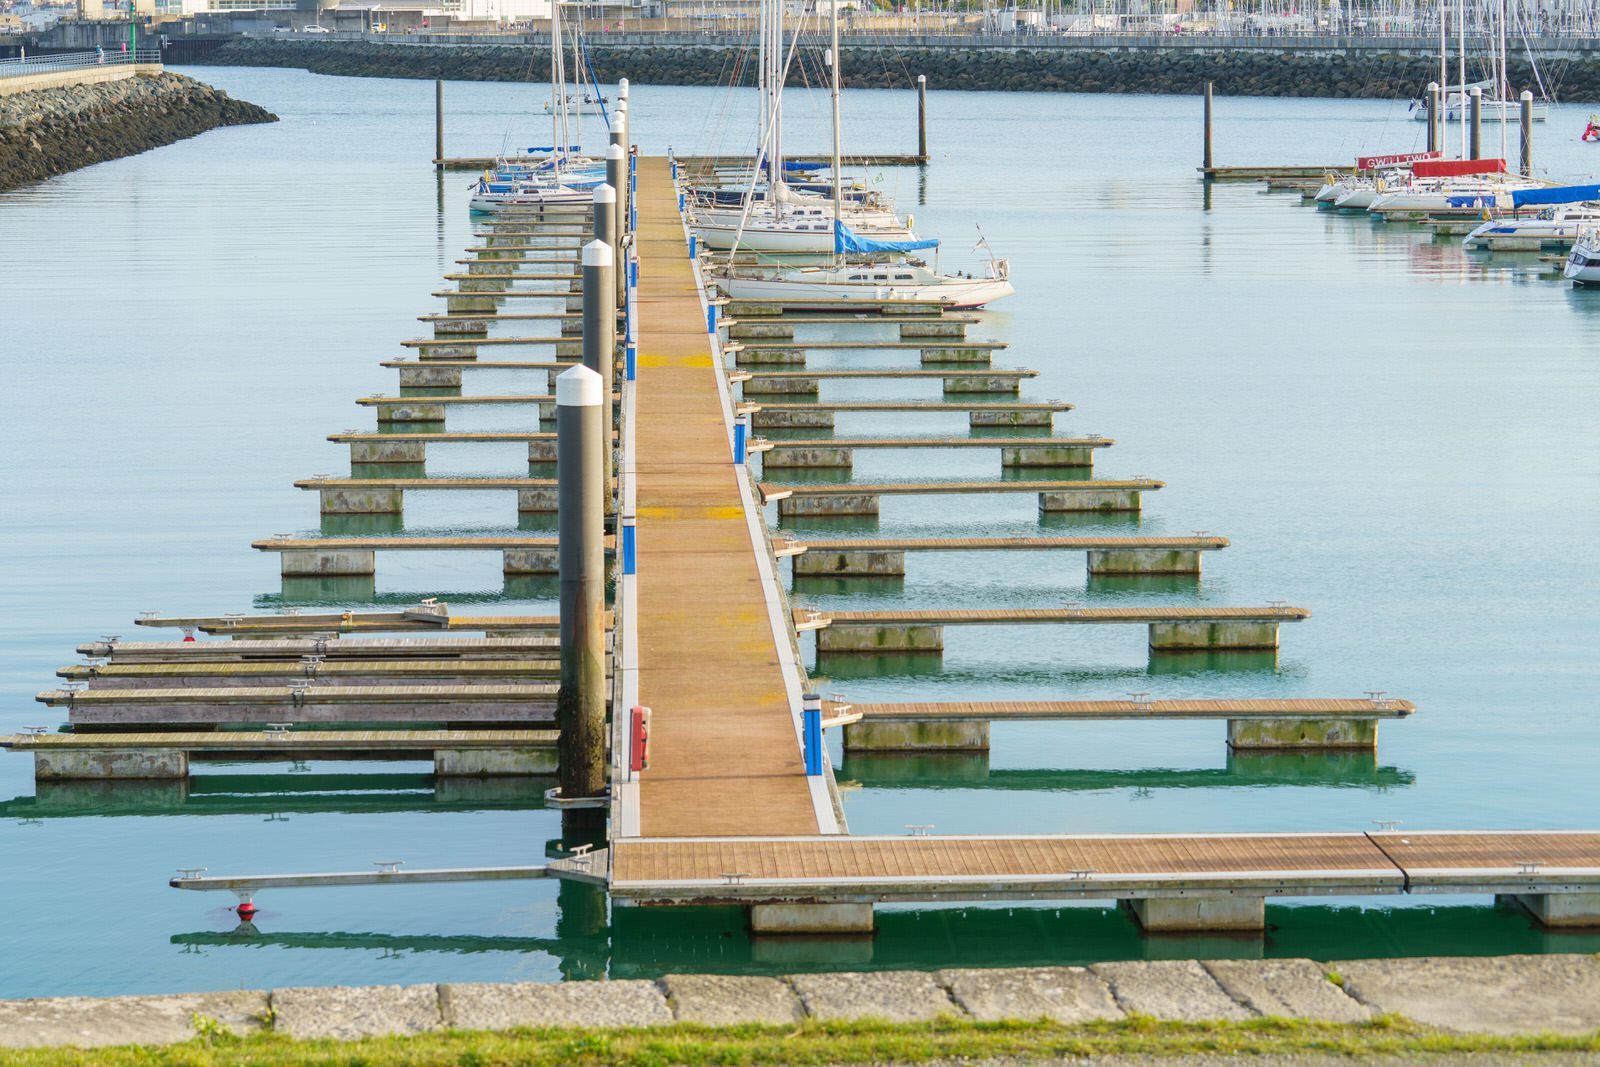 THE SECTION OF THE MARINA NEAR THE WESTERN BREAKWATER [DUN LAOGHAIRE HARBOUR] 015